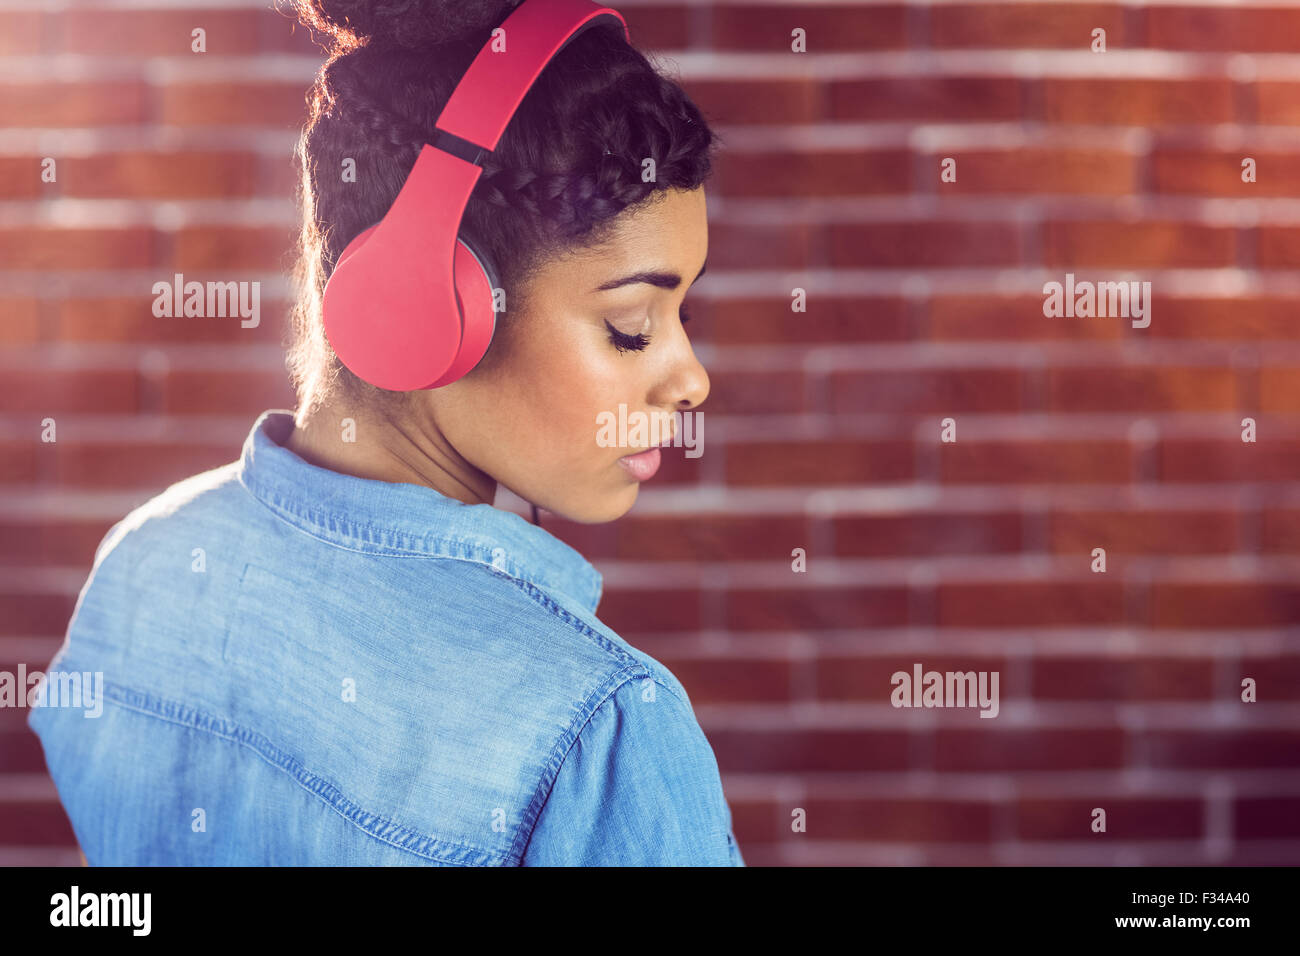 Pretty young woman with headphones looking back Stock Photo